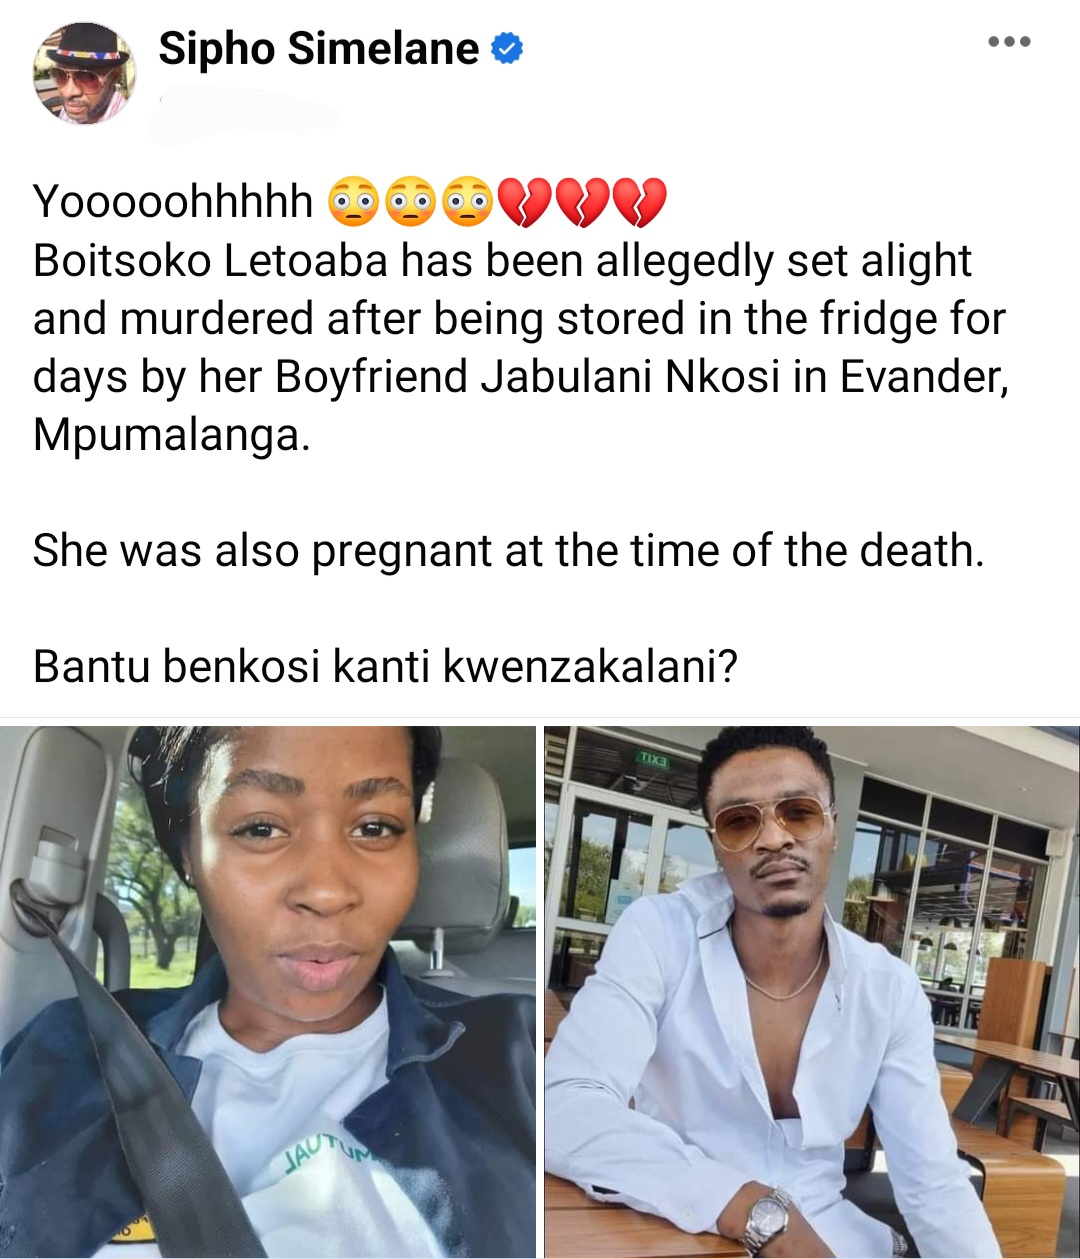 Pregnant woman killed and set ablaze after being hidden in fridge by boyfriend in South Africa